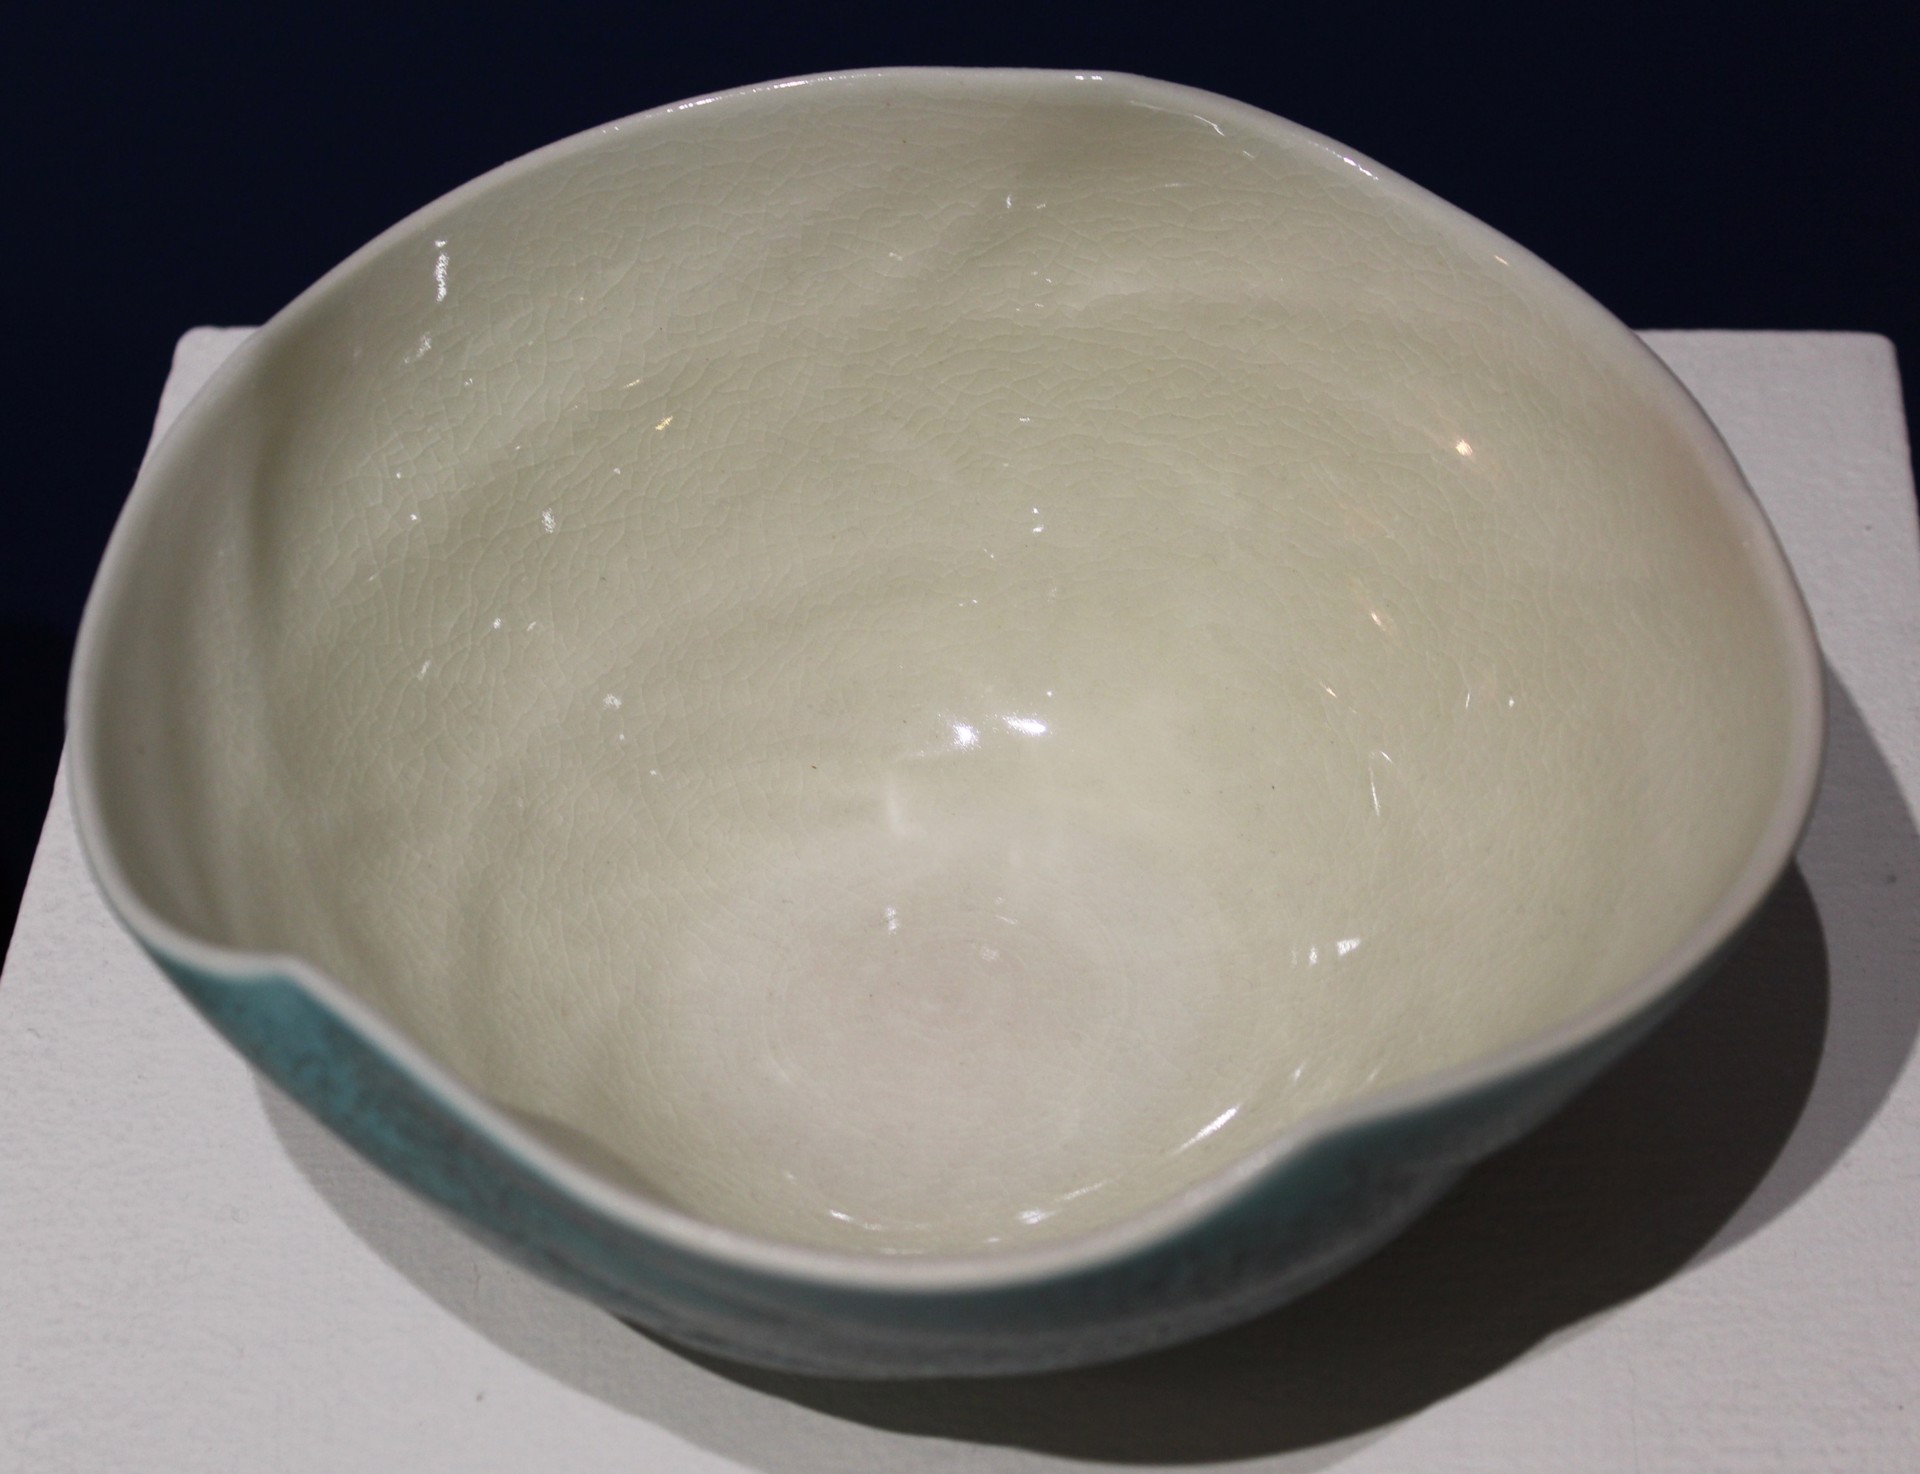 Blue Bowl by Danielle Inabinet